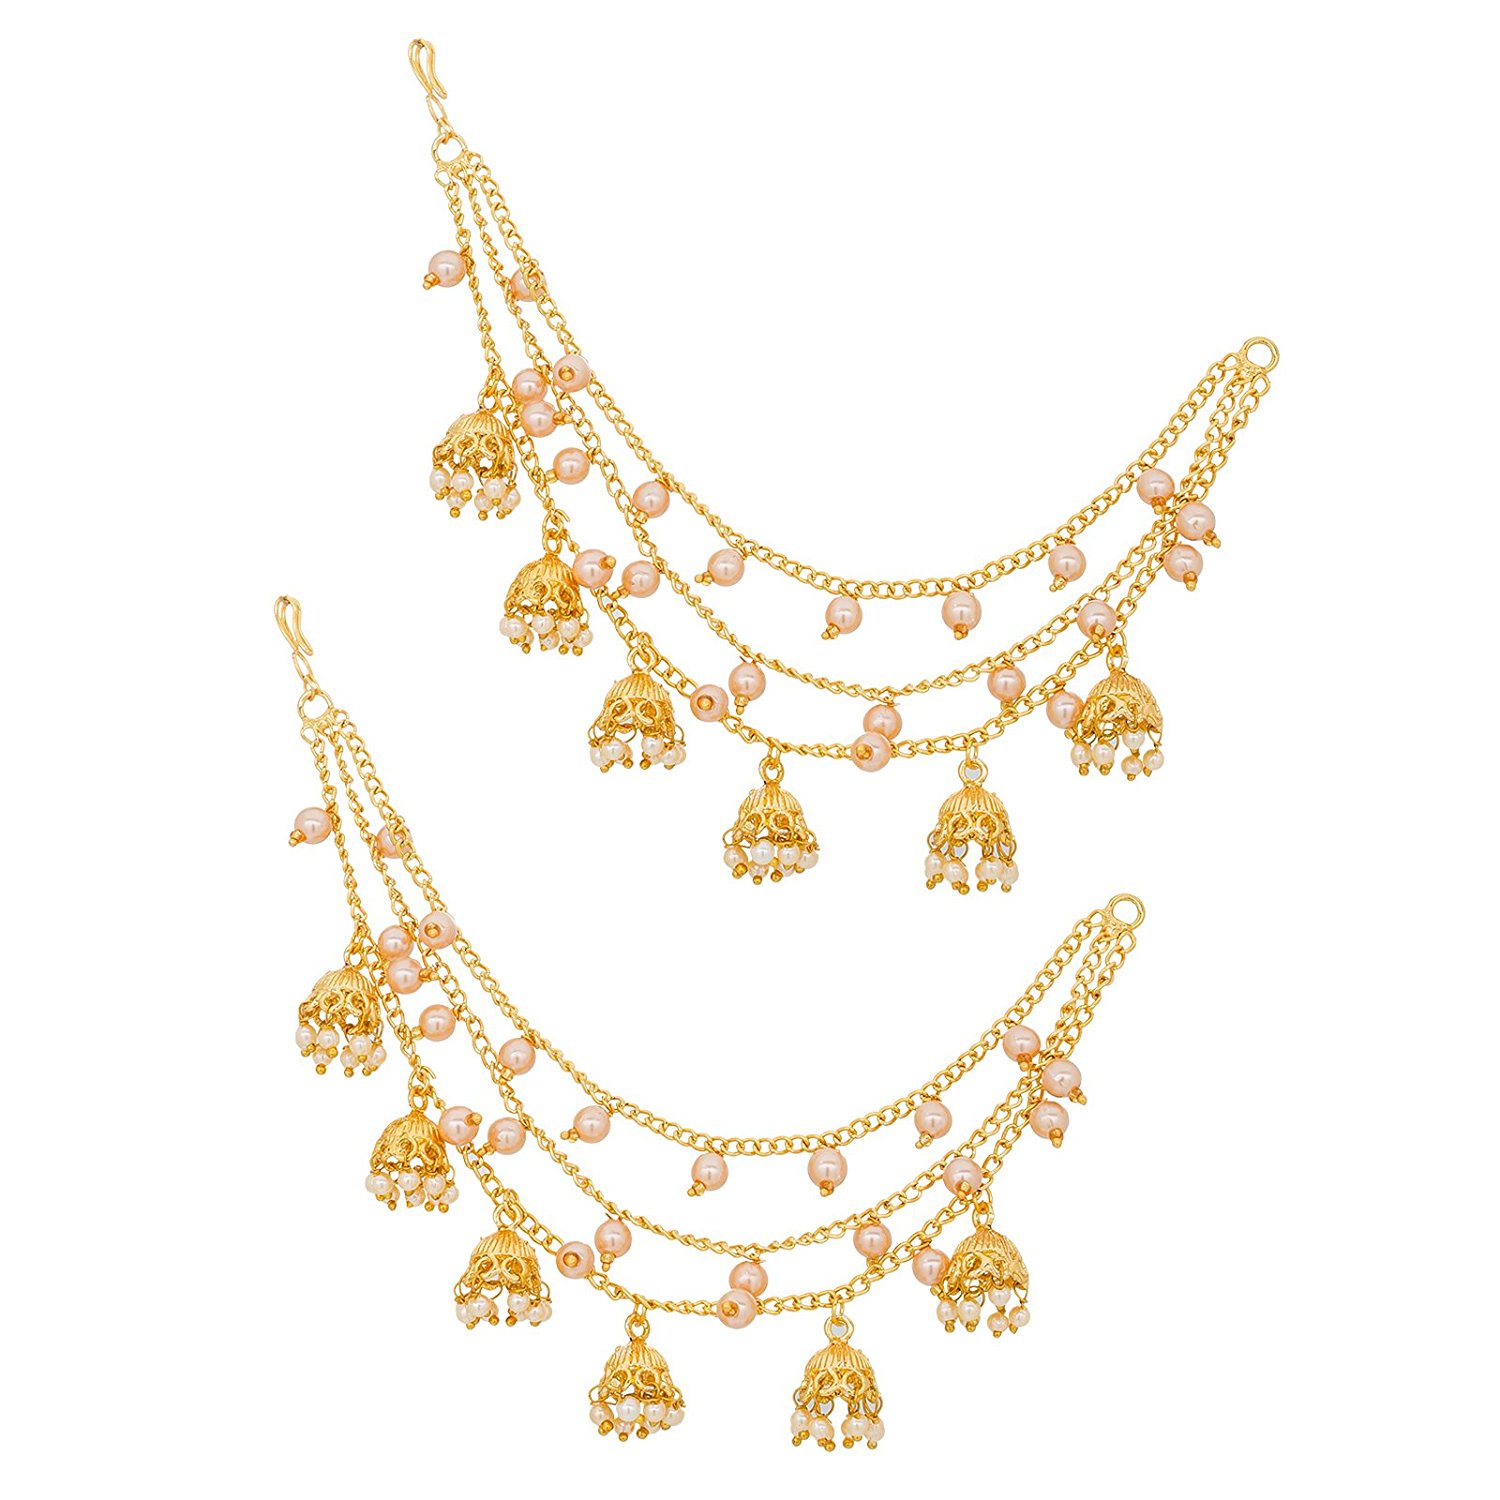 The Luxor Gold Plated Long Chain Jhumki Hair Chain Accessories for Earrings  for Women